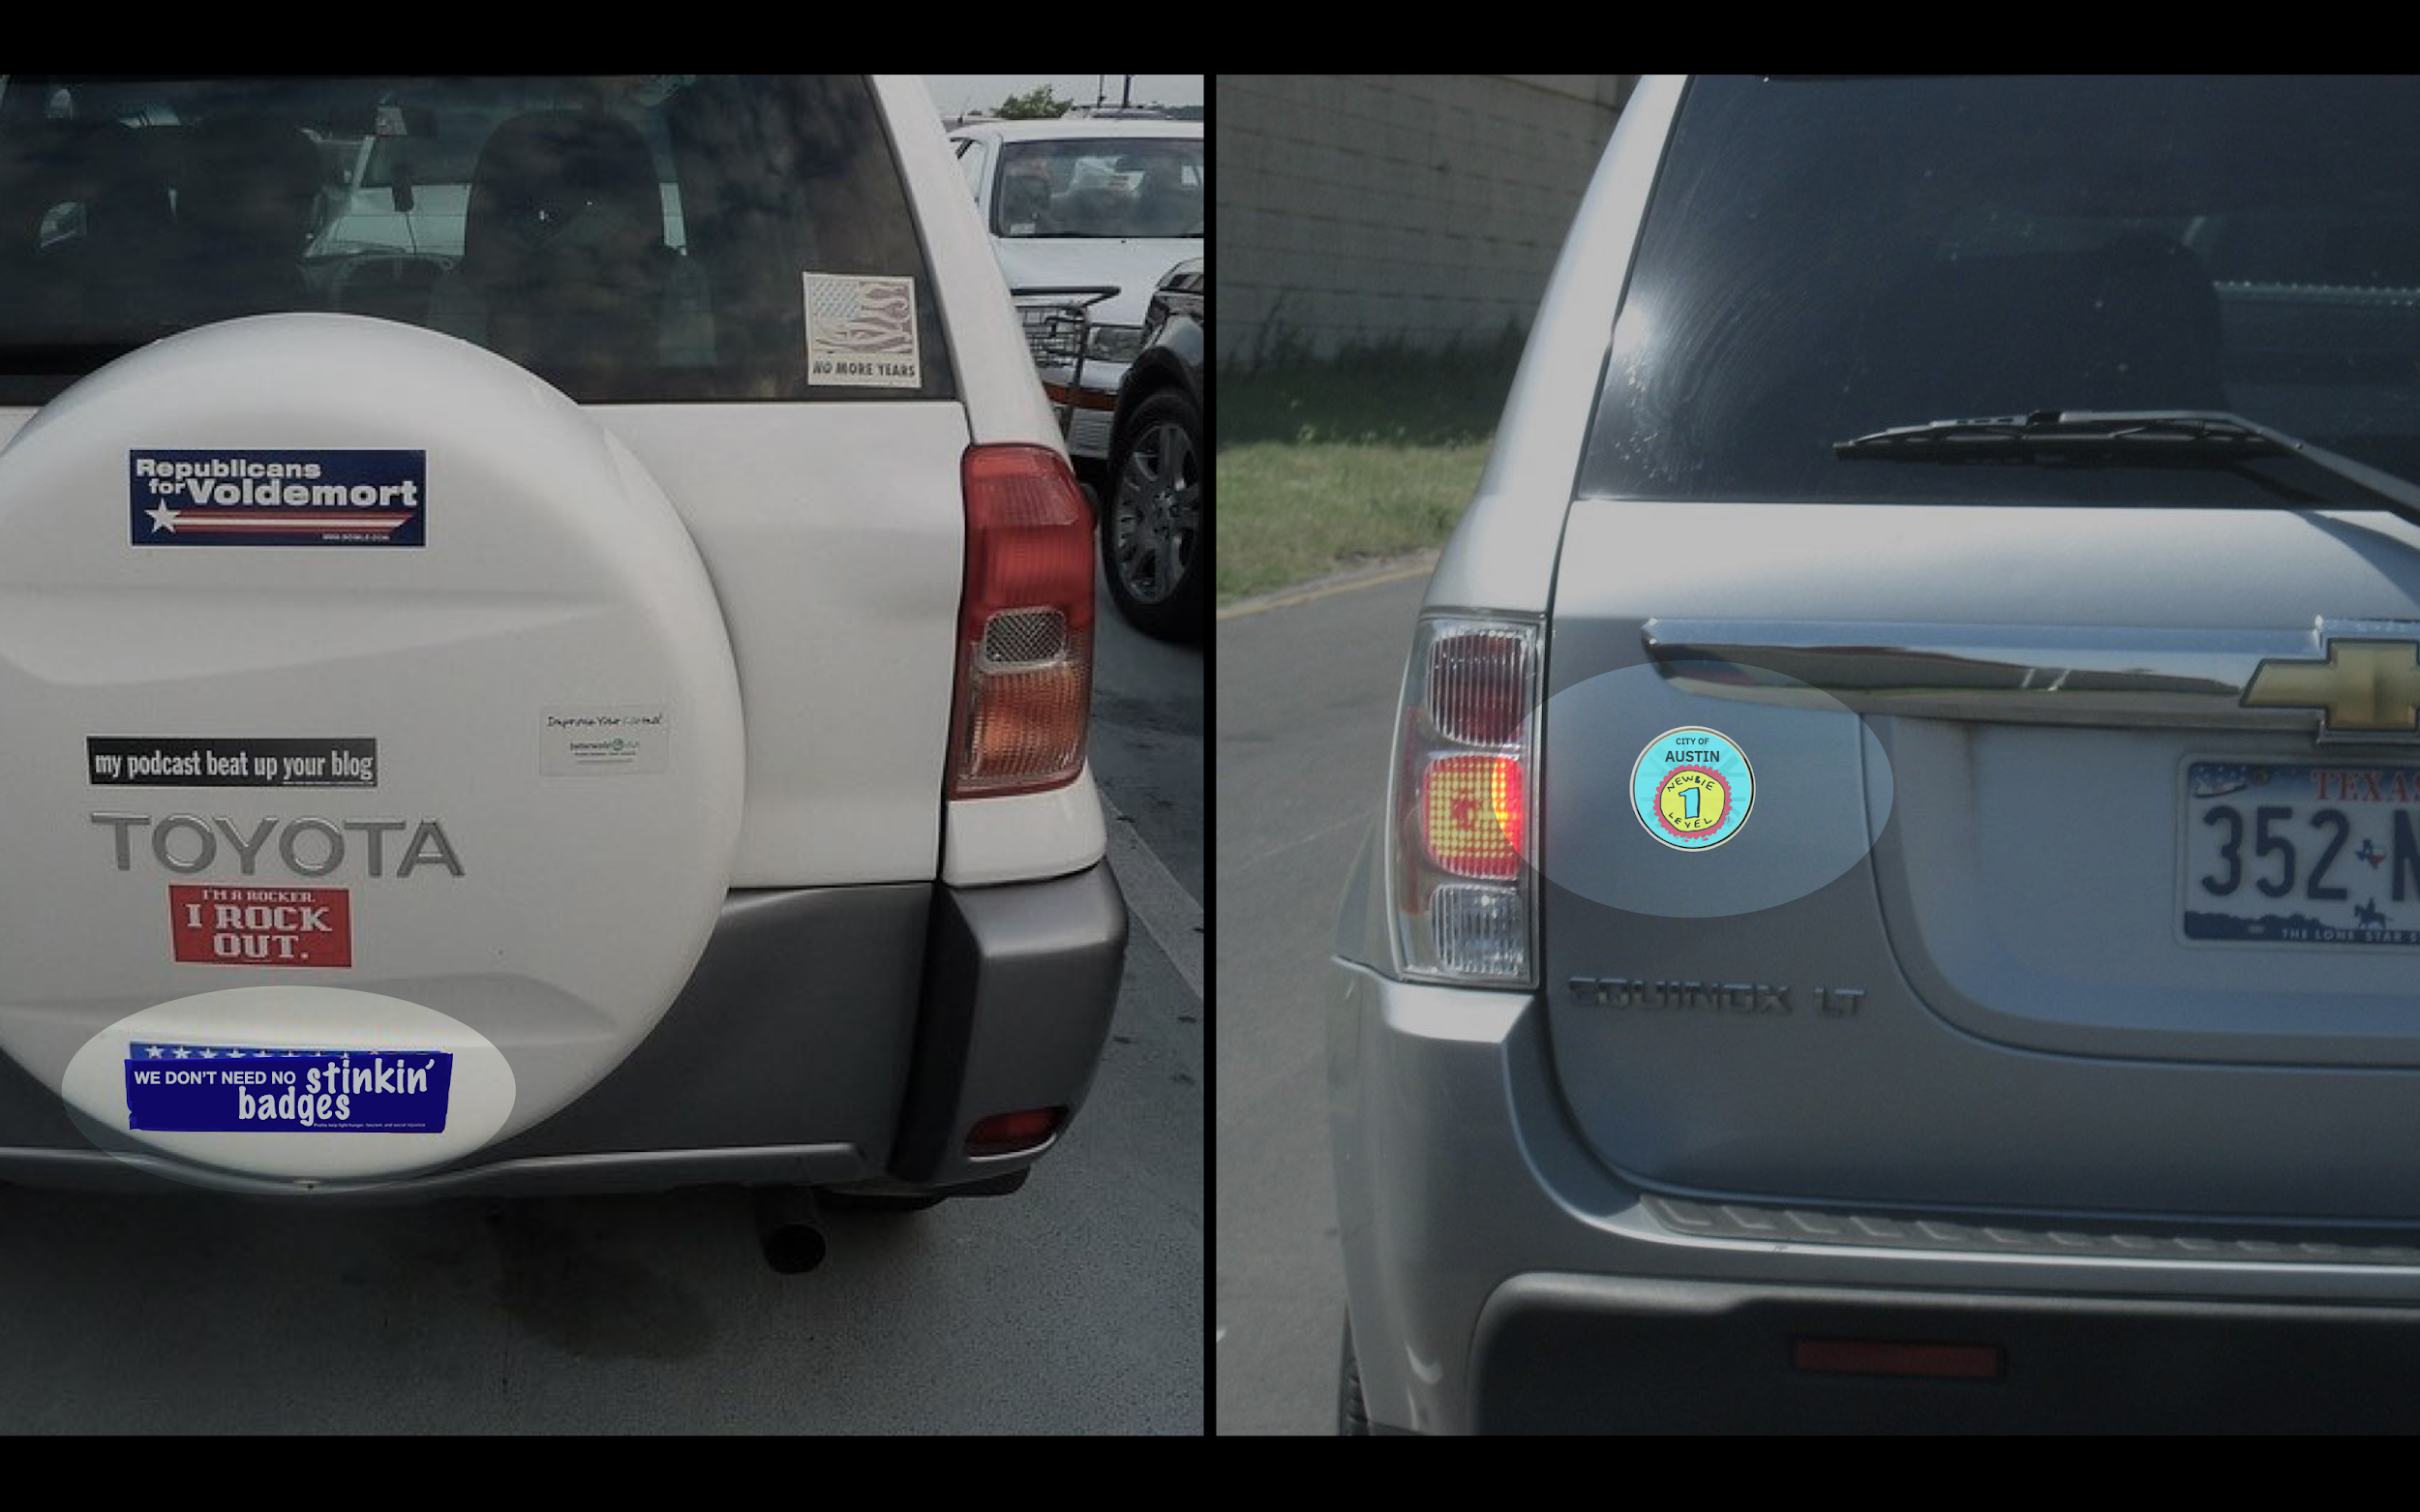 Two images of cars with bumper stickers.